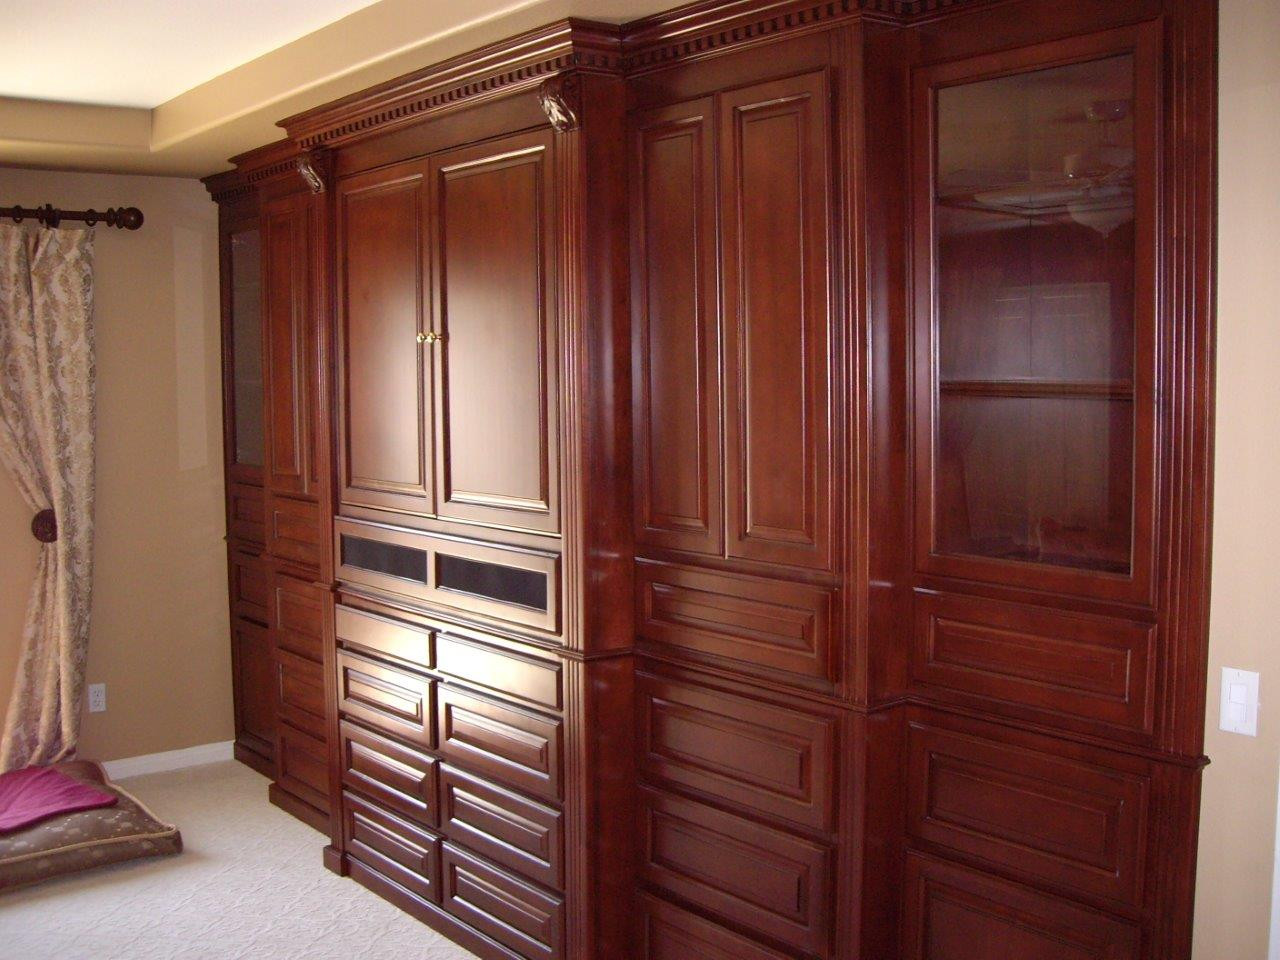 Cabinets For Bedroom
 Murphy Beds and Bedroom Cabinets Woodwork Creations